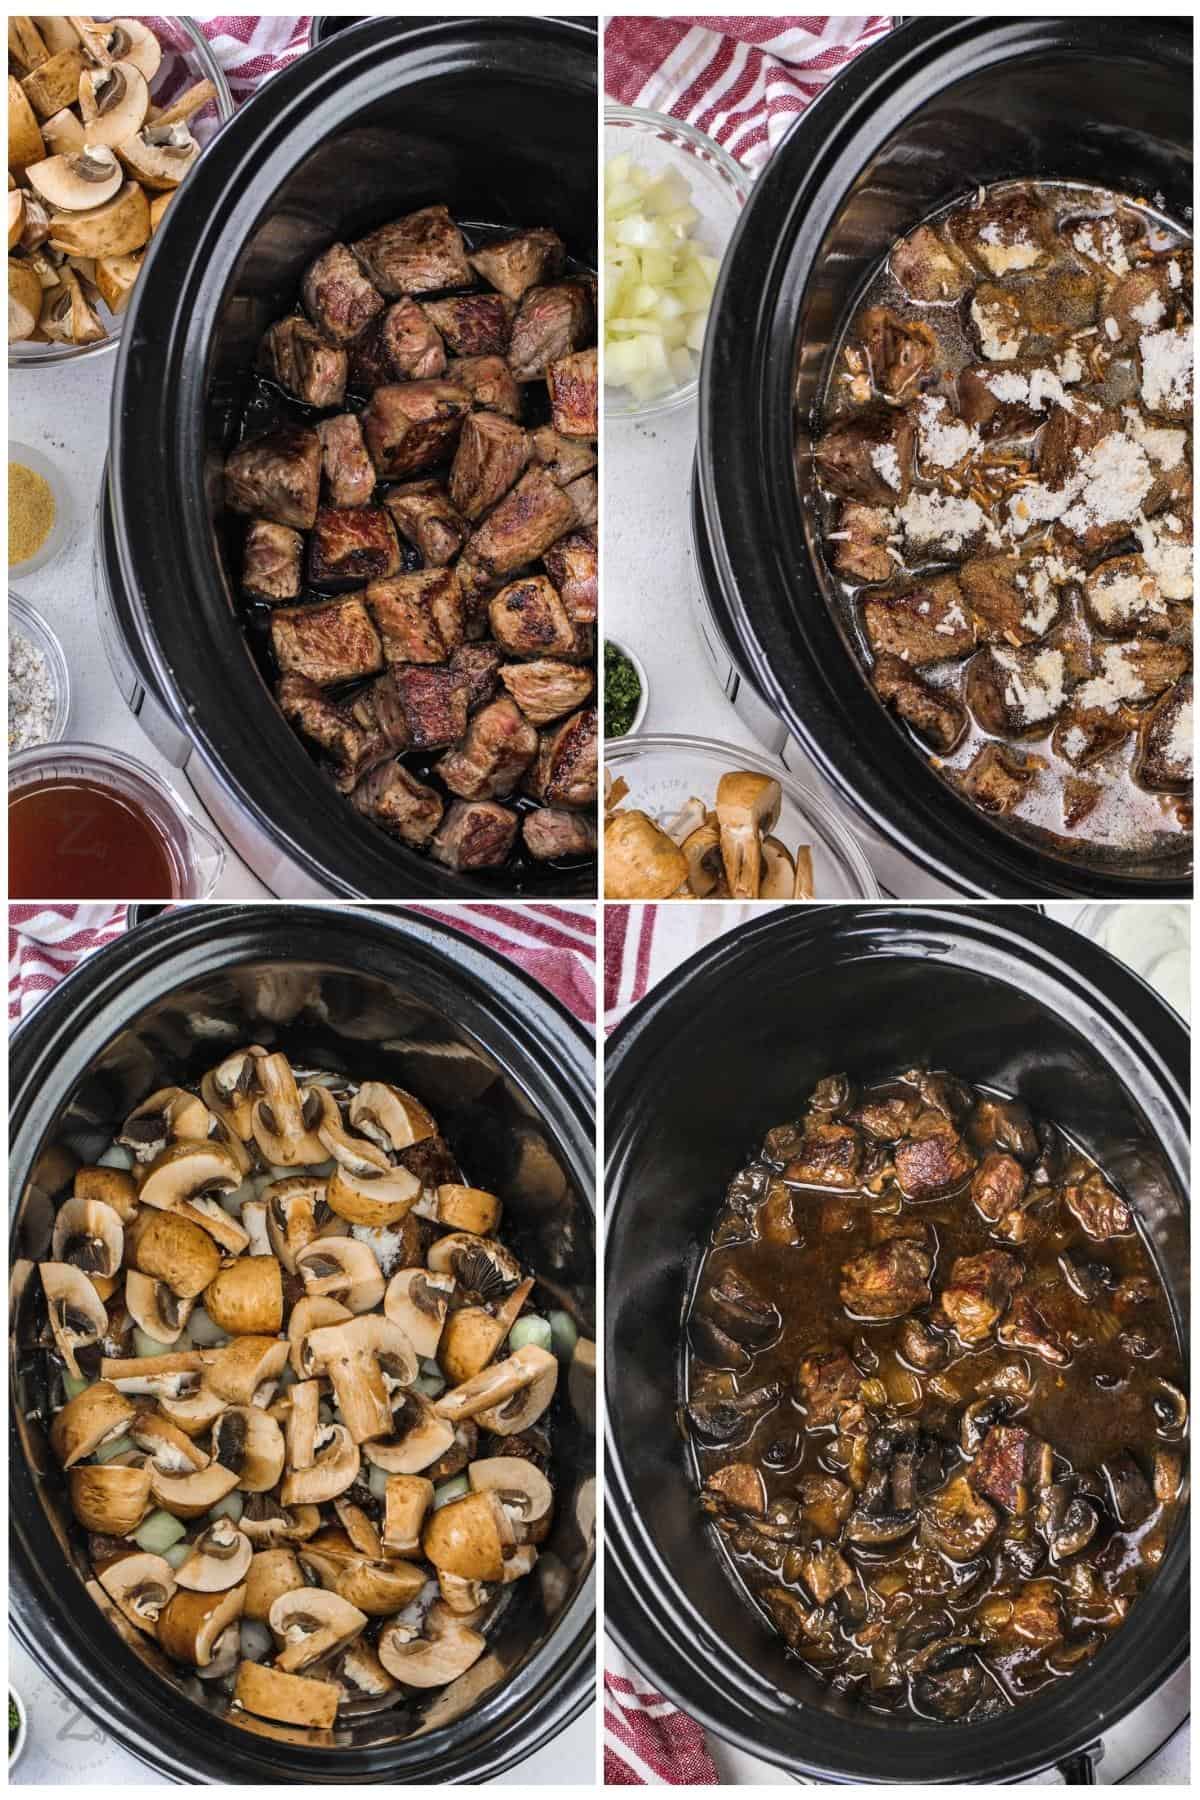 process of adding ingredients together to make Slow Cooker Beef Stroganoff